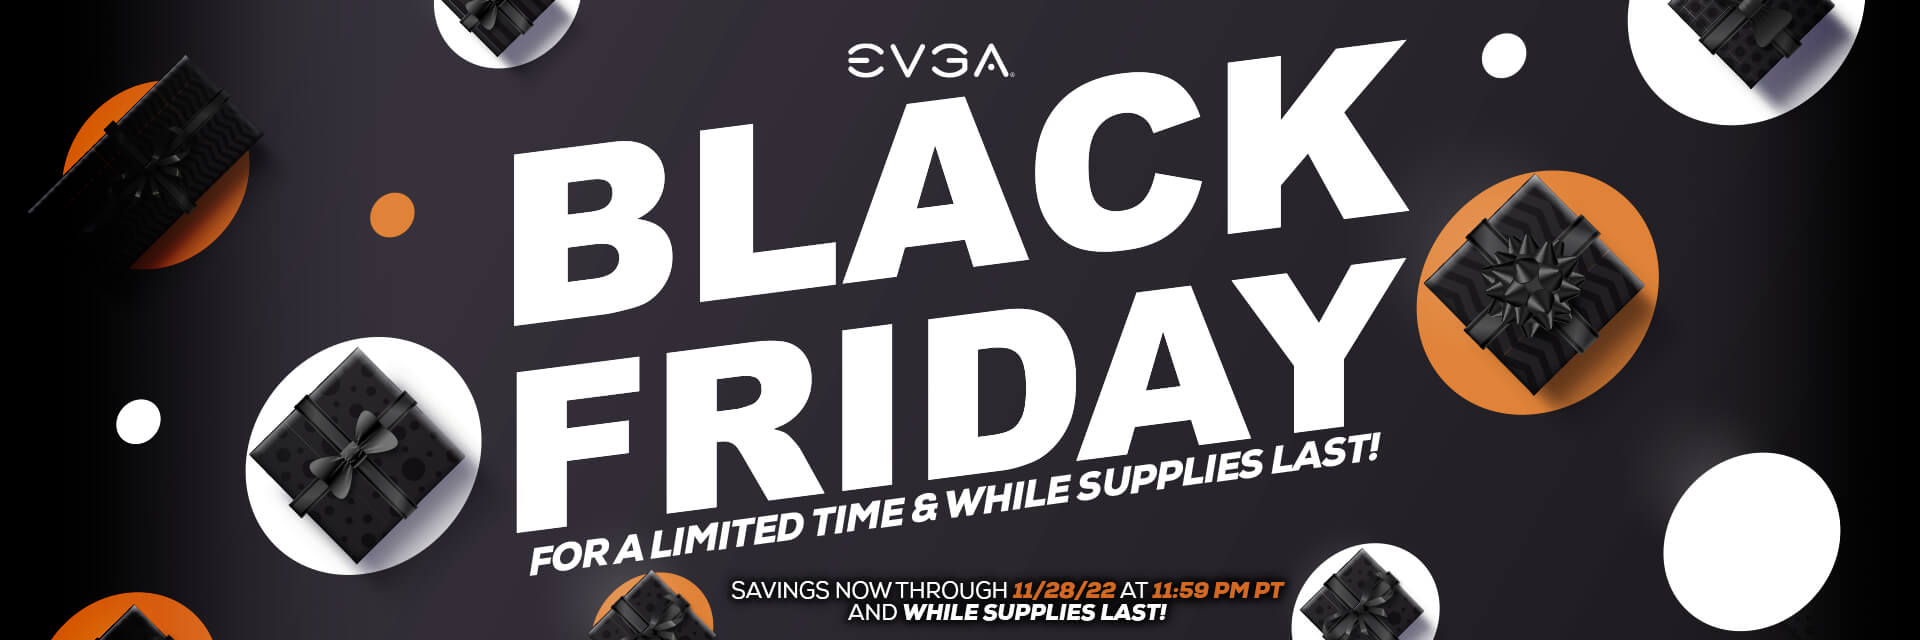 Black Friday For a limited time and while supplies last. Savings now through 11/28/22 11:59PM PT